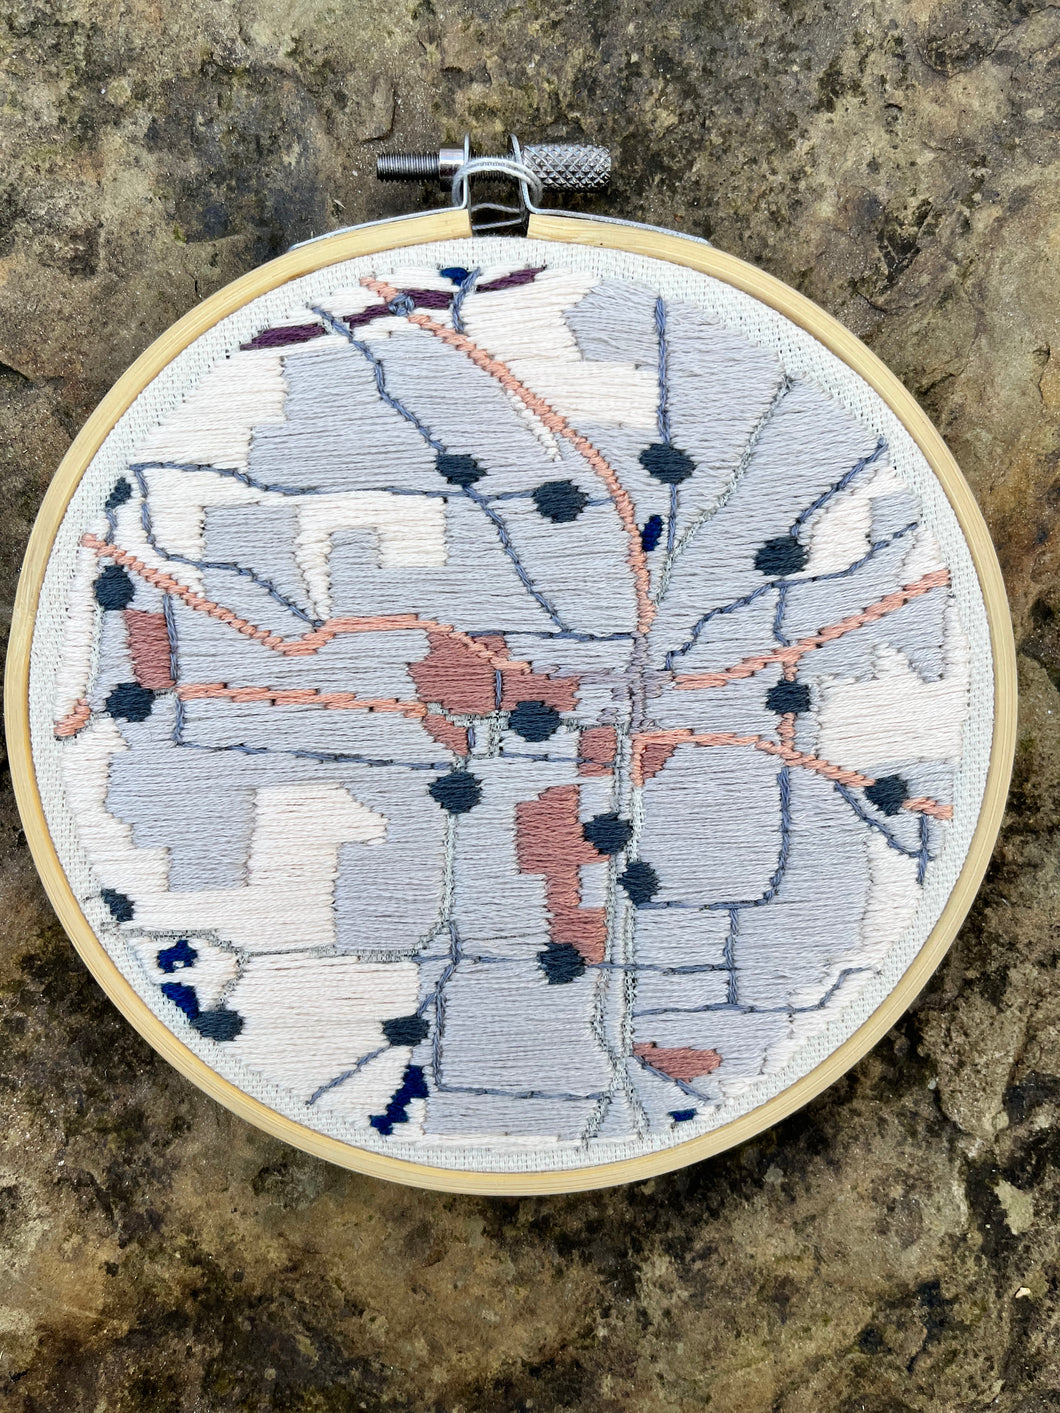 5” Map of Tallahassee, FL Hand-Embroidered Hoop